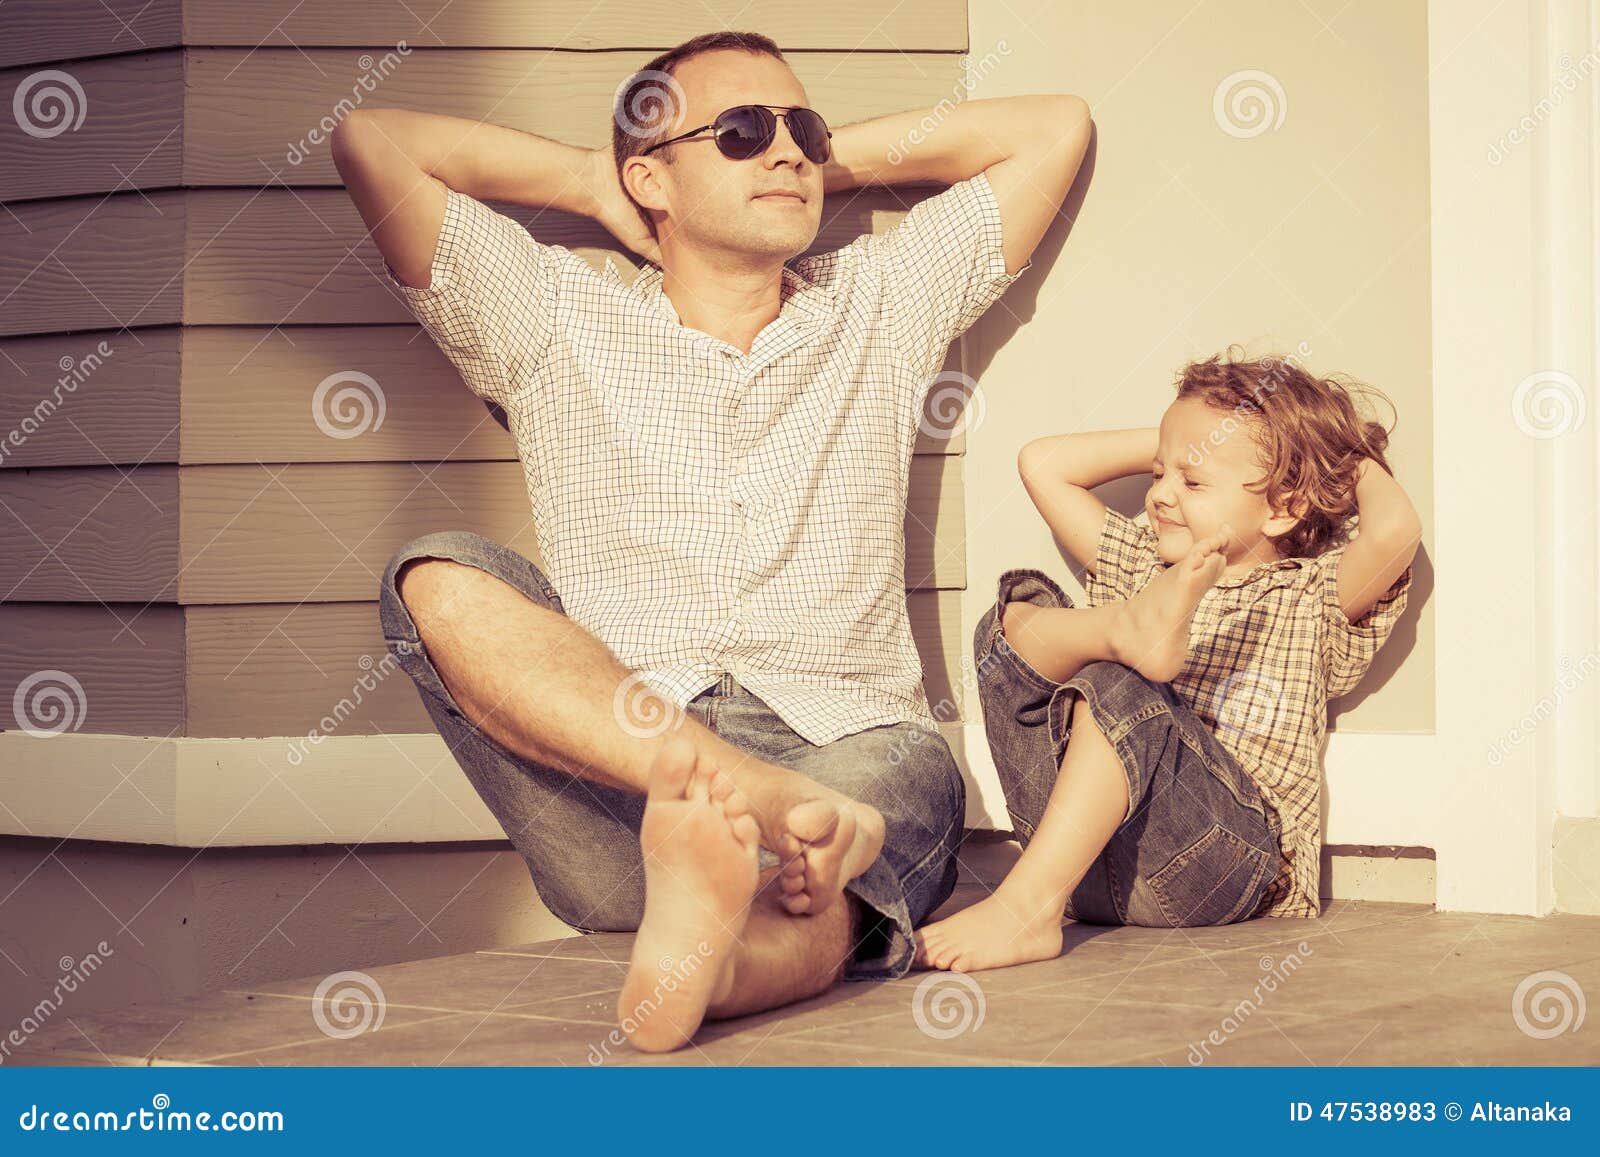 dad and son playing near a house